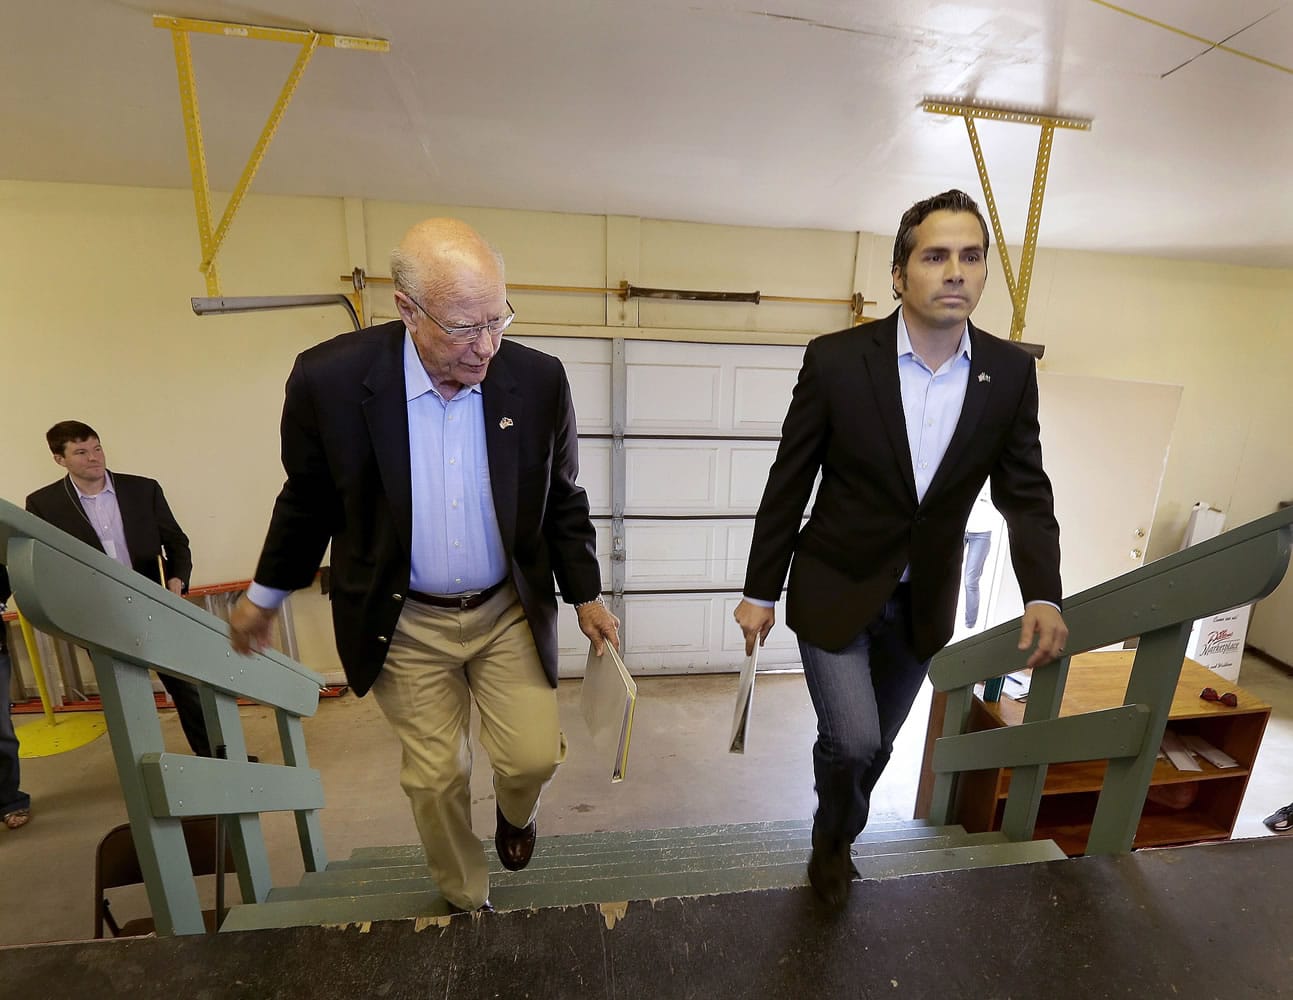 Republican Sen. Pat Roberts, left, and Greg Orman walk to the stage before a Senate debate Sept. 6, in Hutchinson, Kan. Orman, an independent candidate challenging Roberts for the U.S. Senate in Kansas, has turned a longshot independent bid into a threat to the GOP veteran.